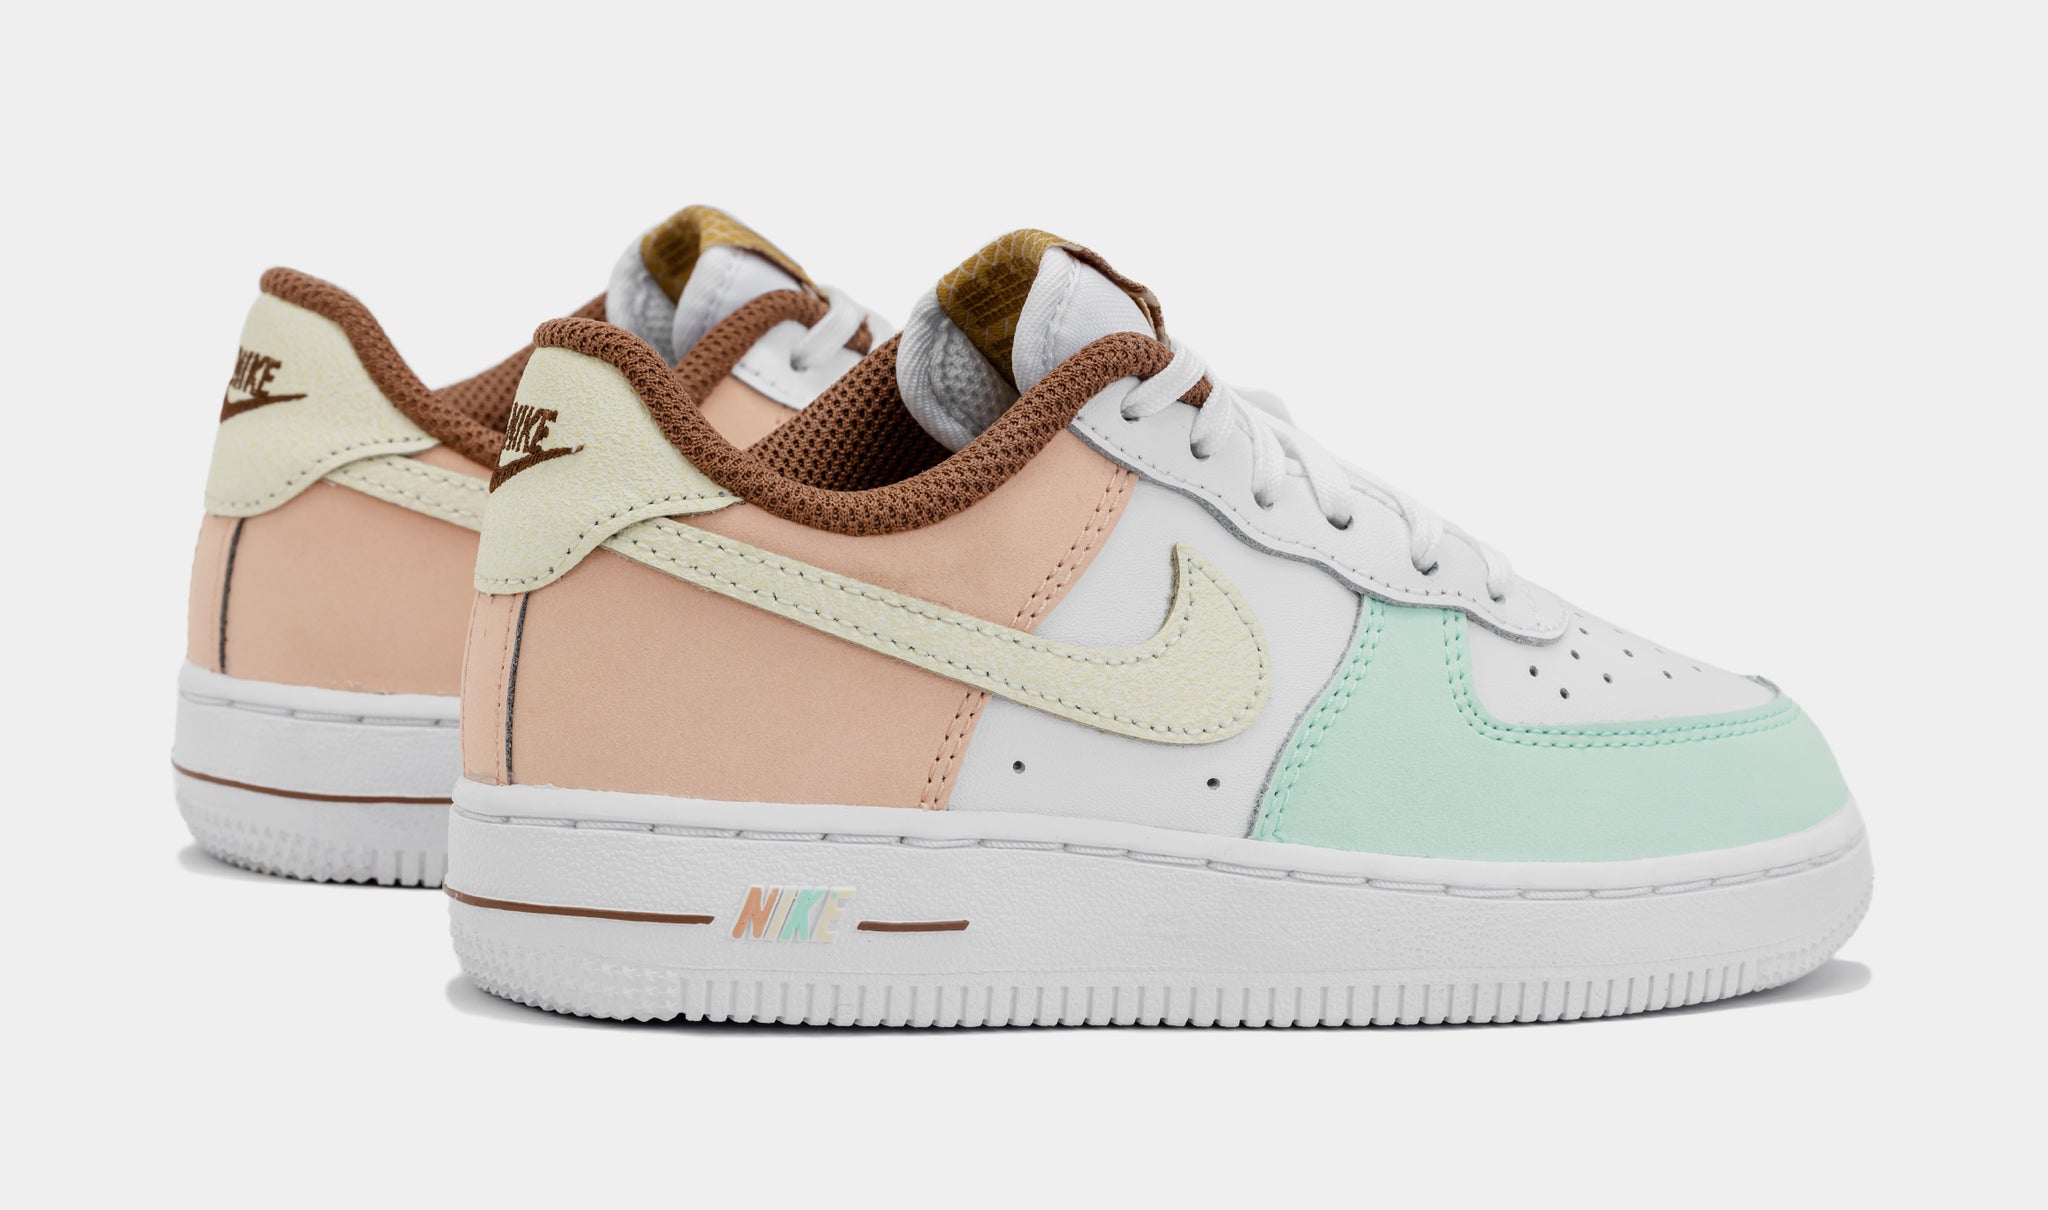 Nike Air Force 1 Shadow trainers in white pink and green